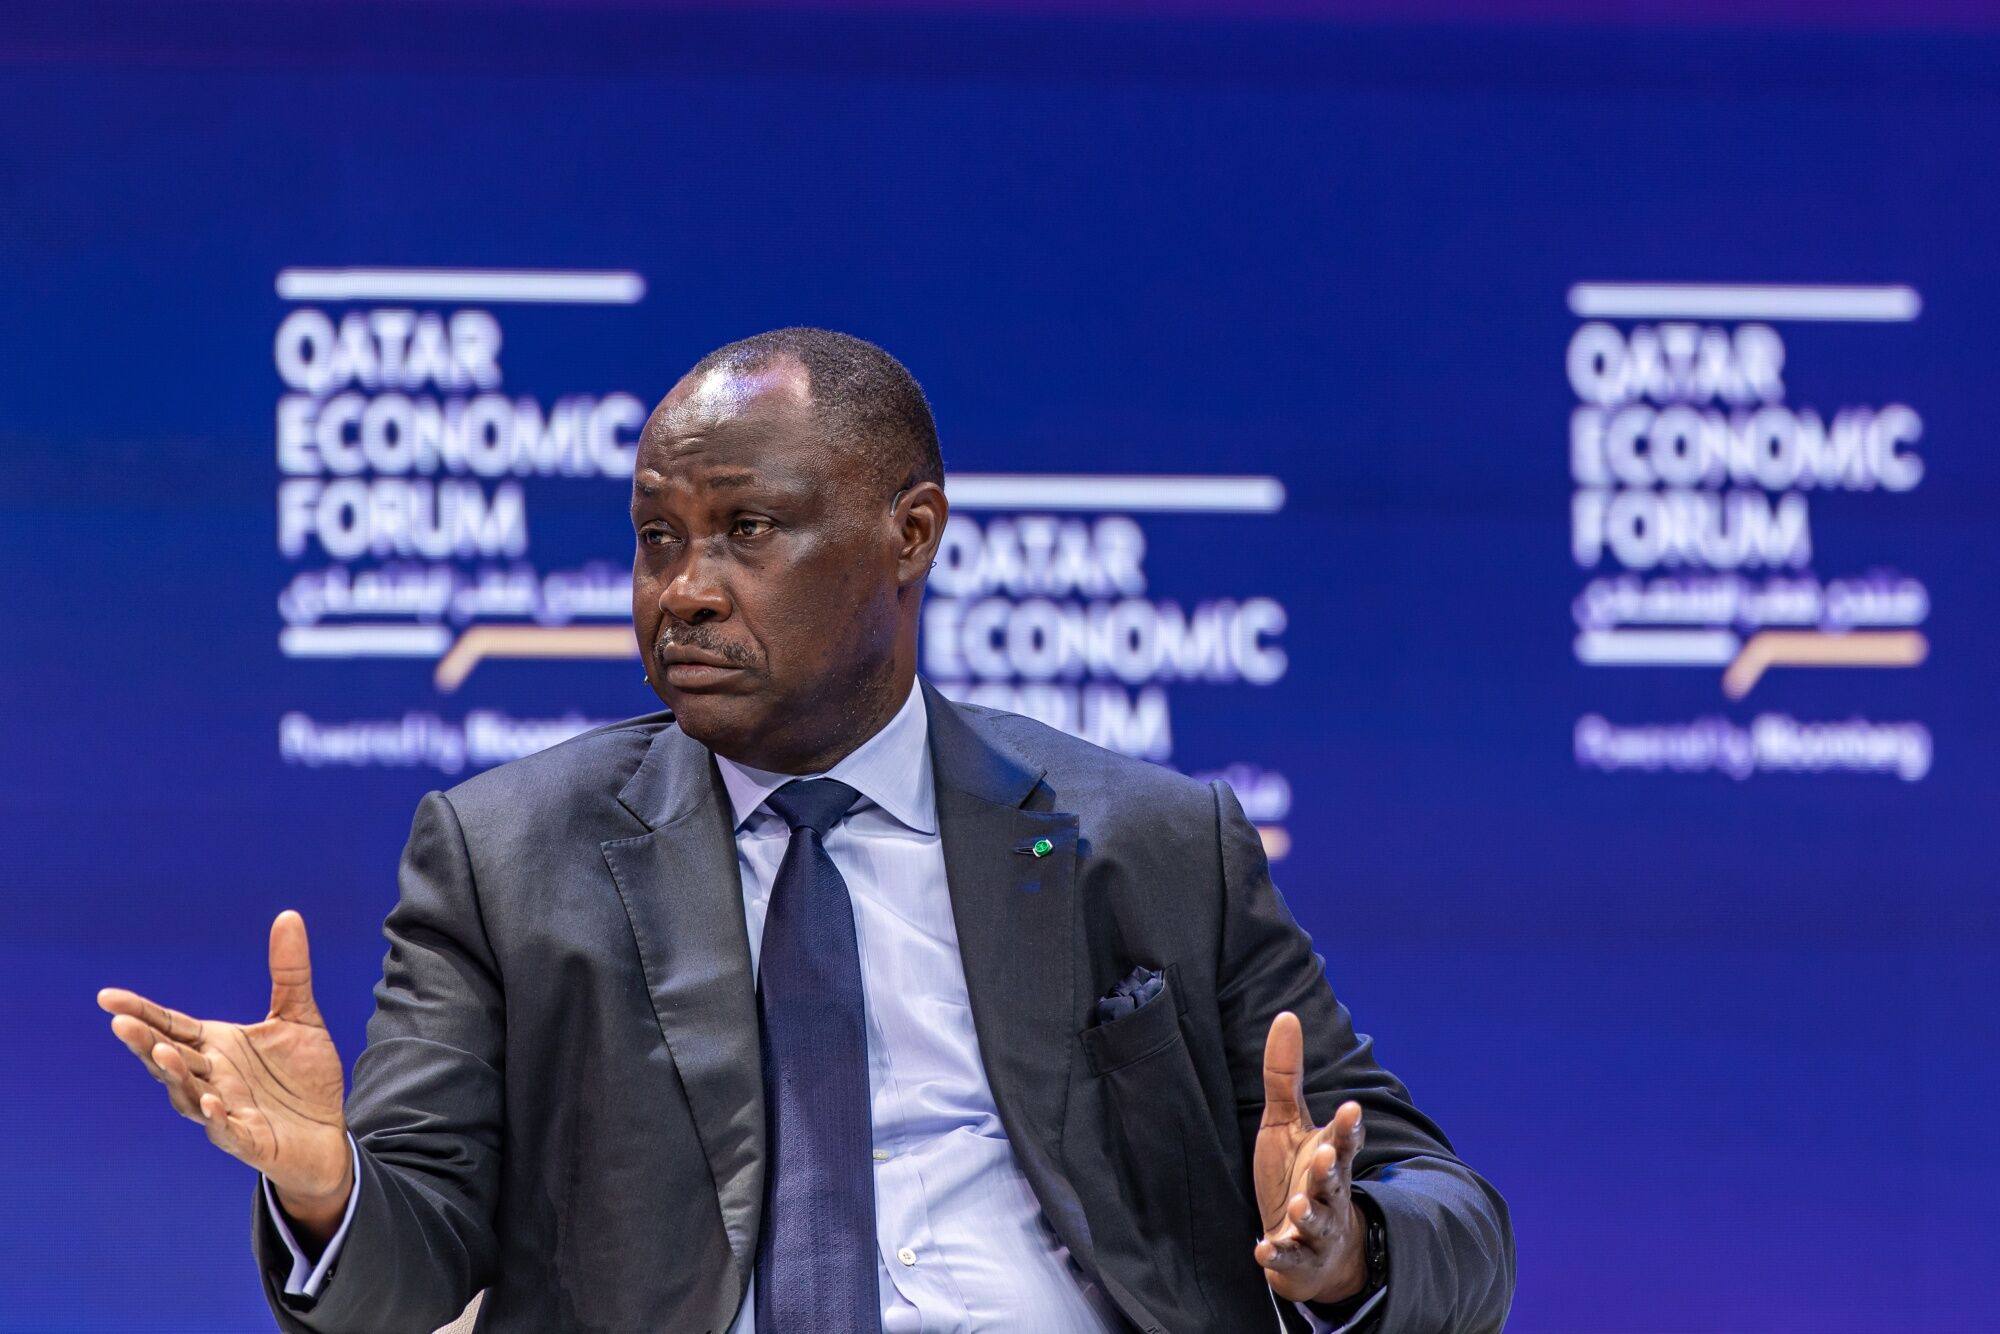 Samaila Zubairu, chief executive of the Africa Finance Corporation, says Africa is “open and ready to do business with anybody that wants to do business”. Photo: Bloomberg